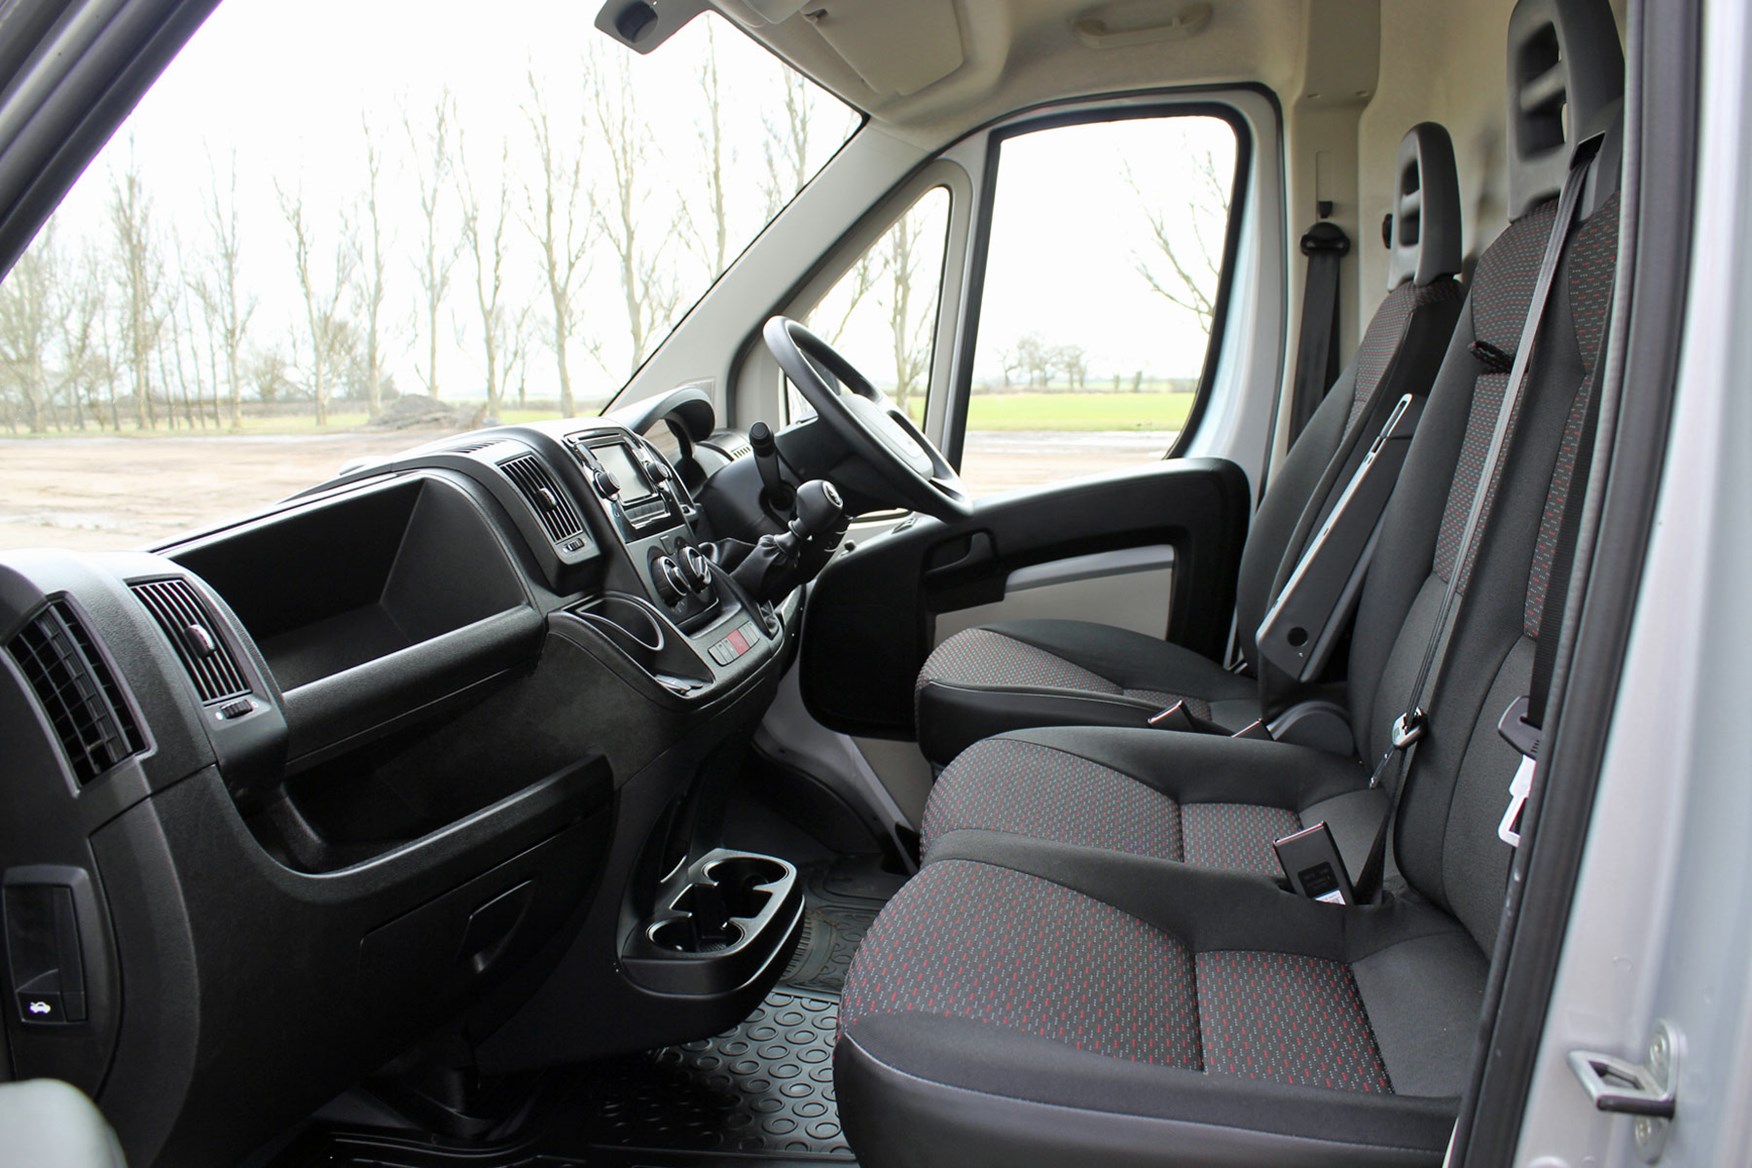 Peugeot Boxer review - cab interior and seats